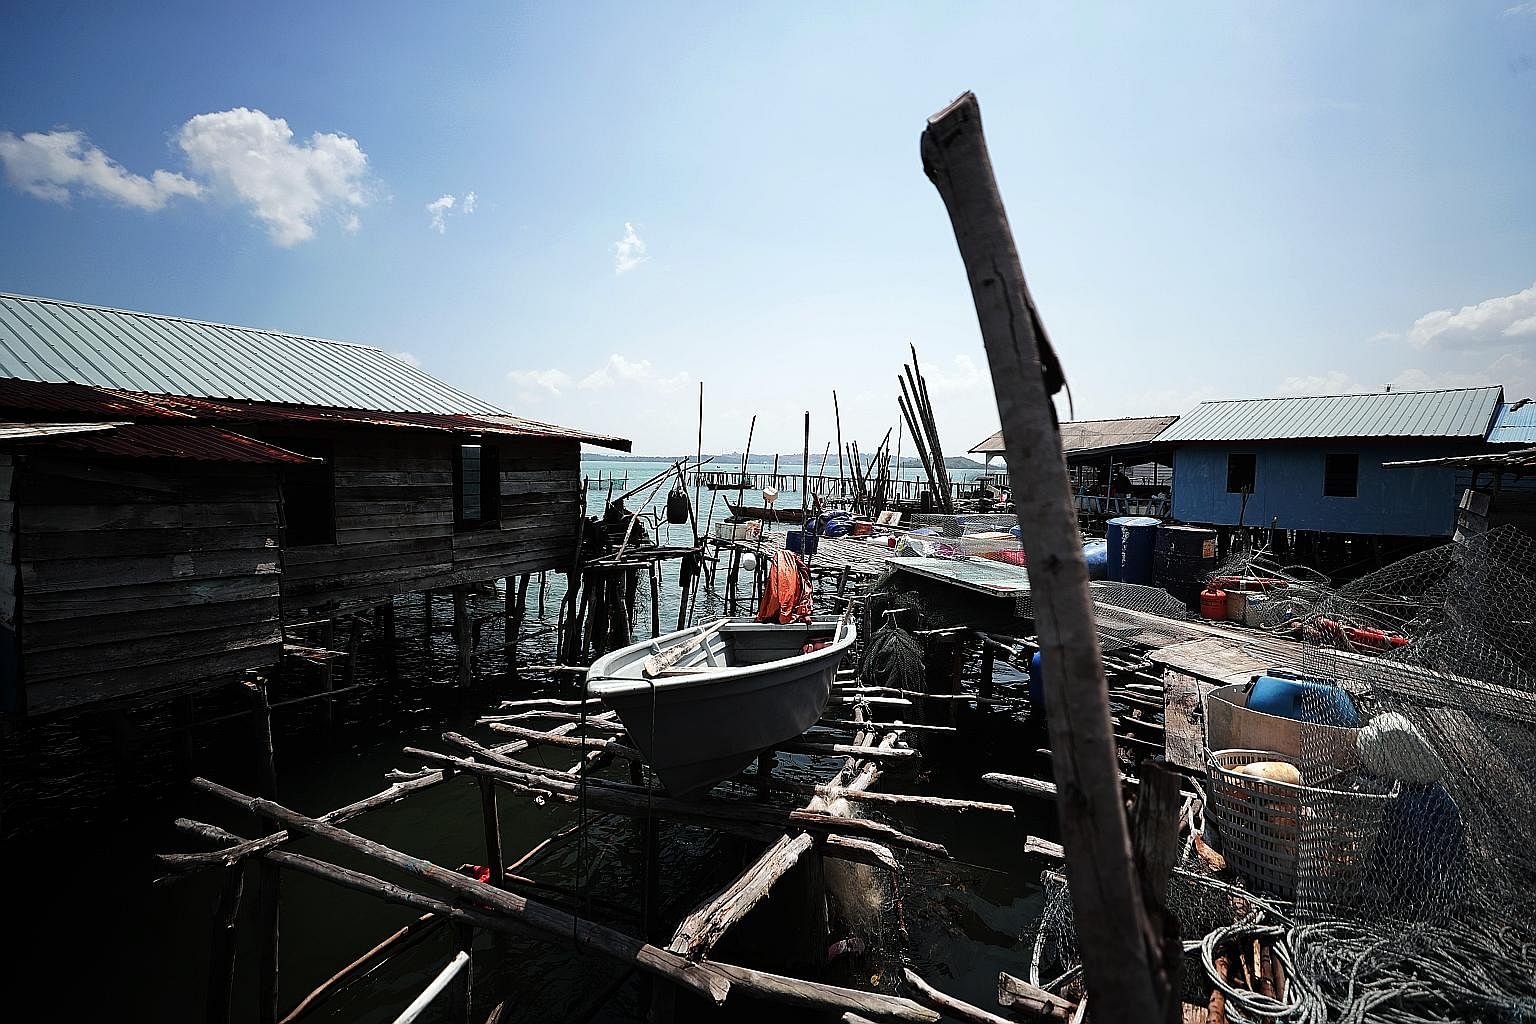 A Lion Air aircraft repair facility in Batam. Aircraft maintenance, repair and overhaul is an emerging industry for which Indonesian Foreign Minister Retno Marsudi is hoping for cooperation with Singapore. Air Mas village, an indigenous Orang Asli en